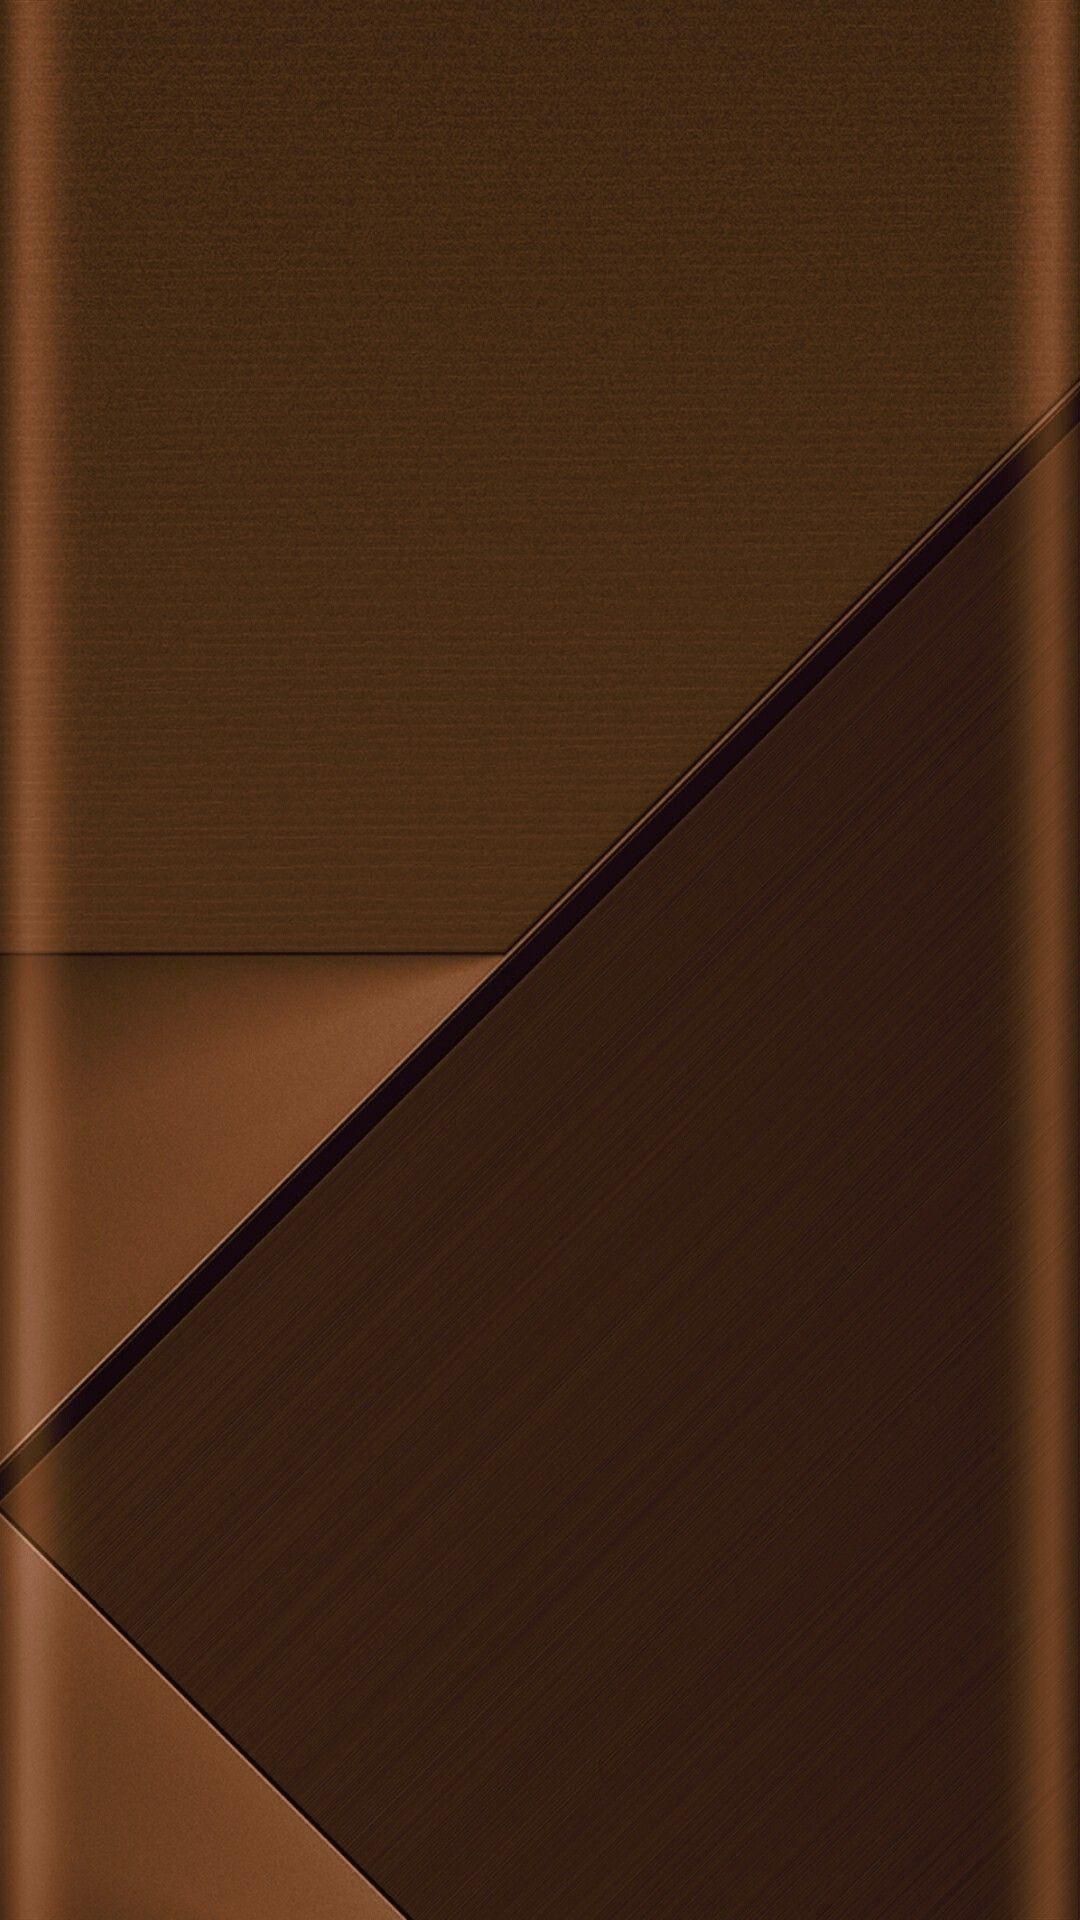 1080 x 1920 · jpeg - Beige Brown Ombre Background - The Adventures of Lolo